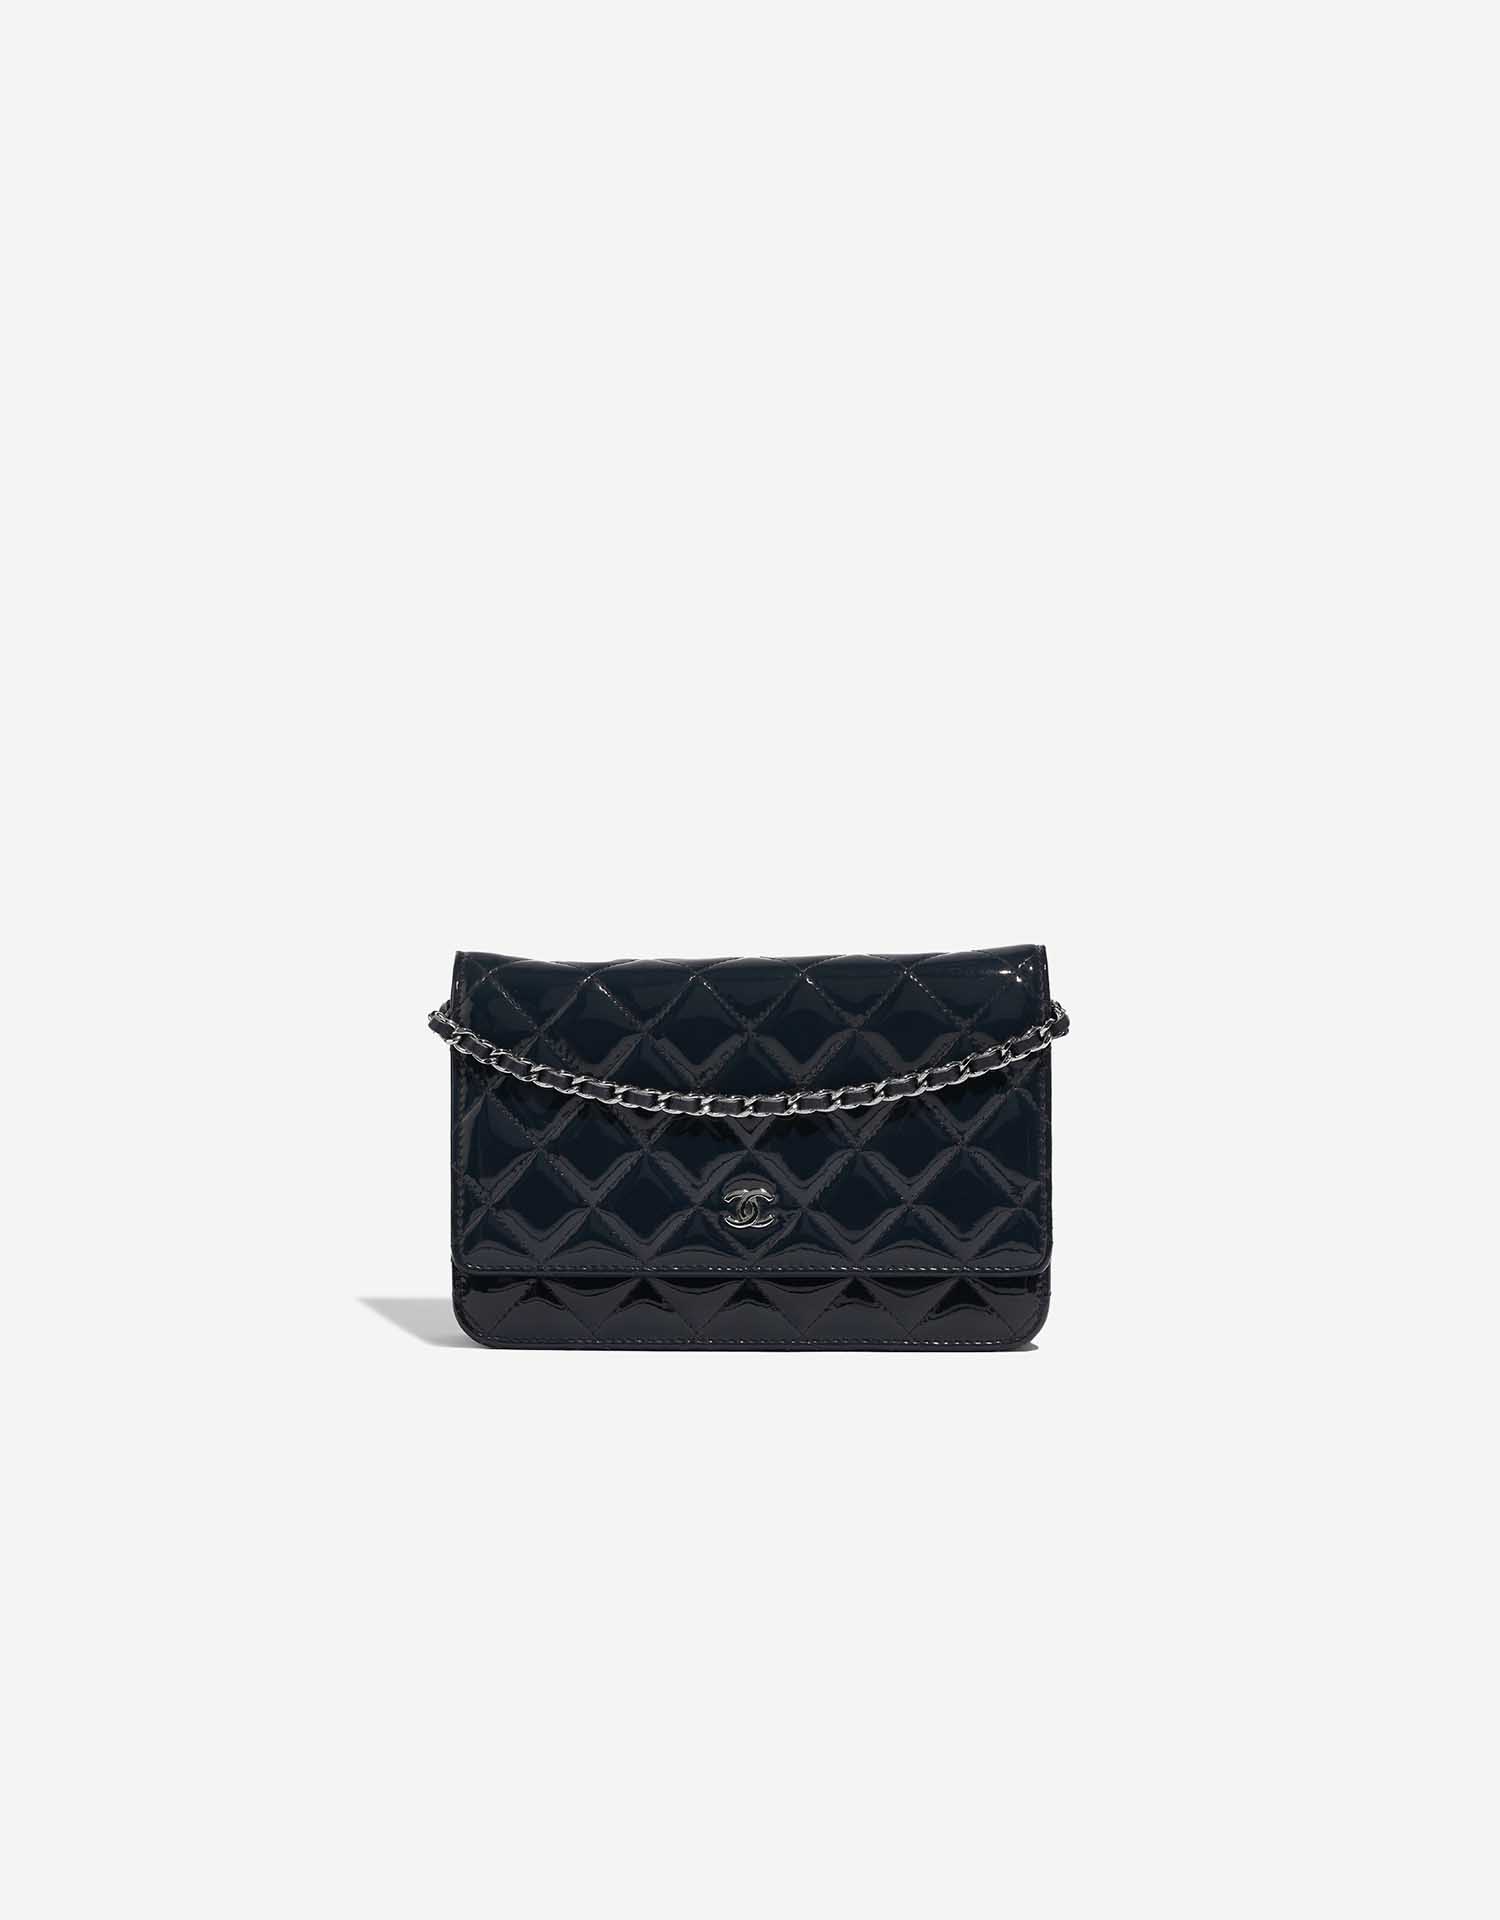 Chanel Timeless WOC Patent Leather Dark Blue